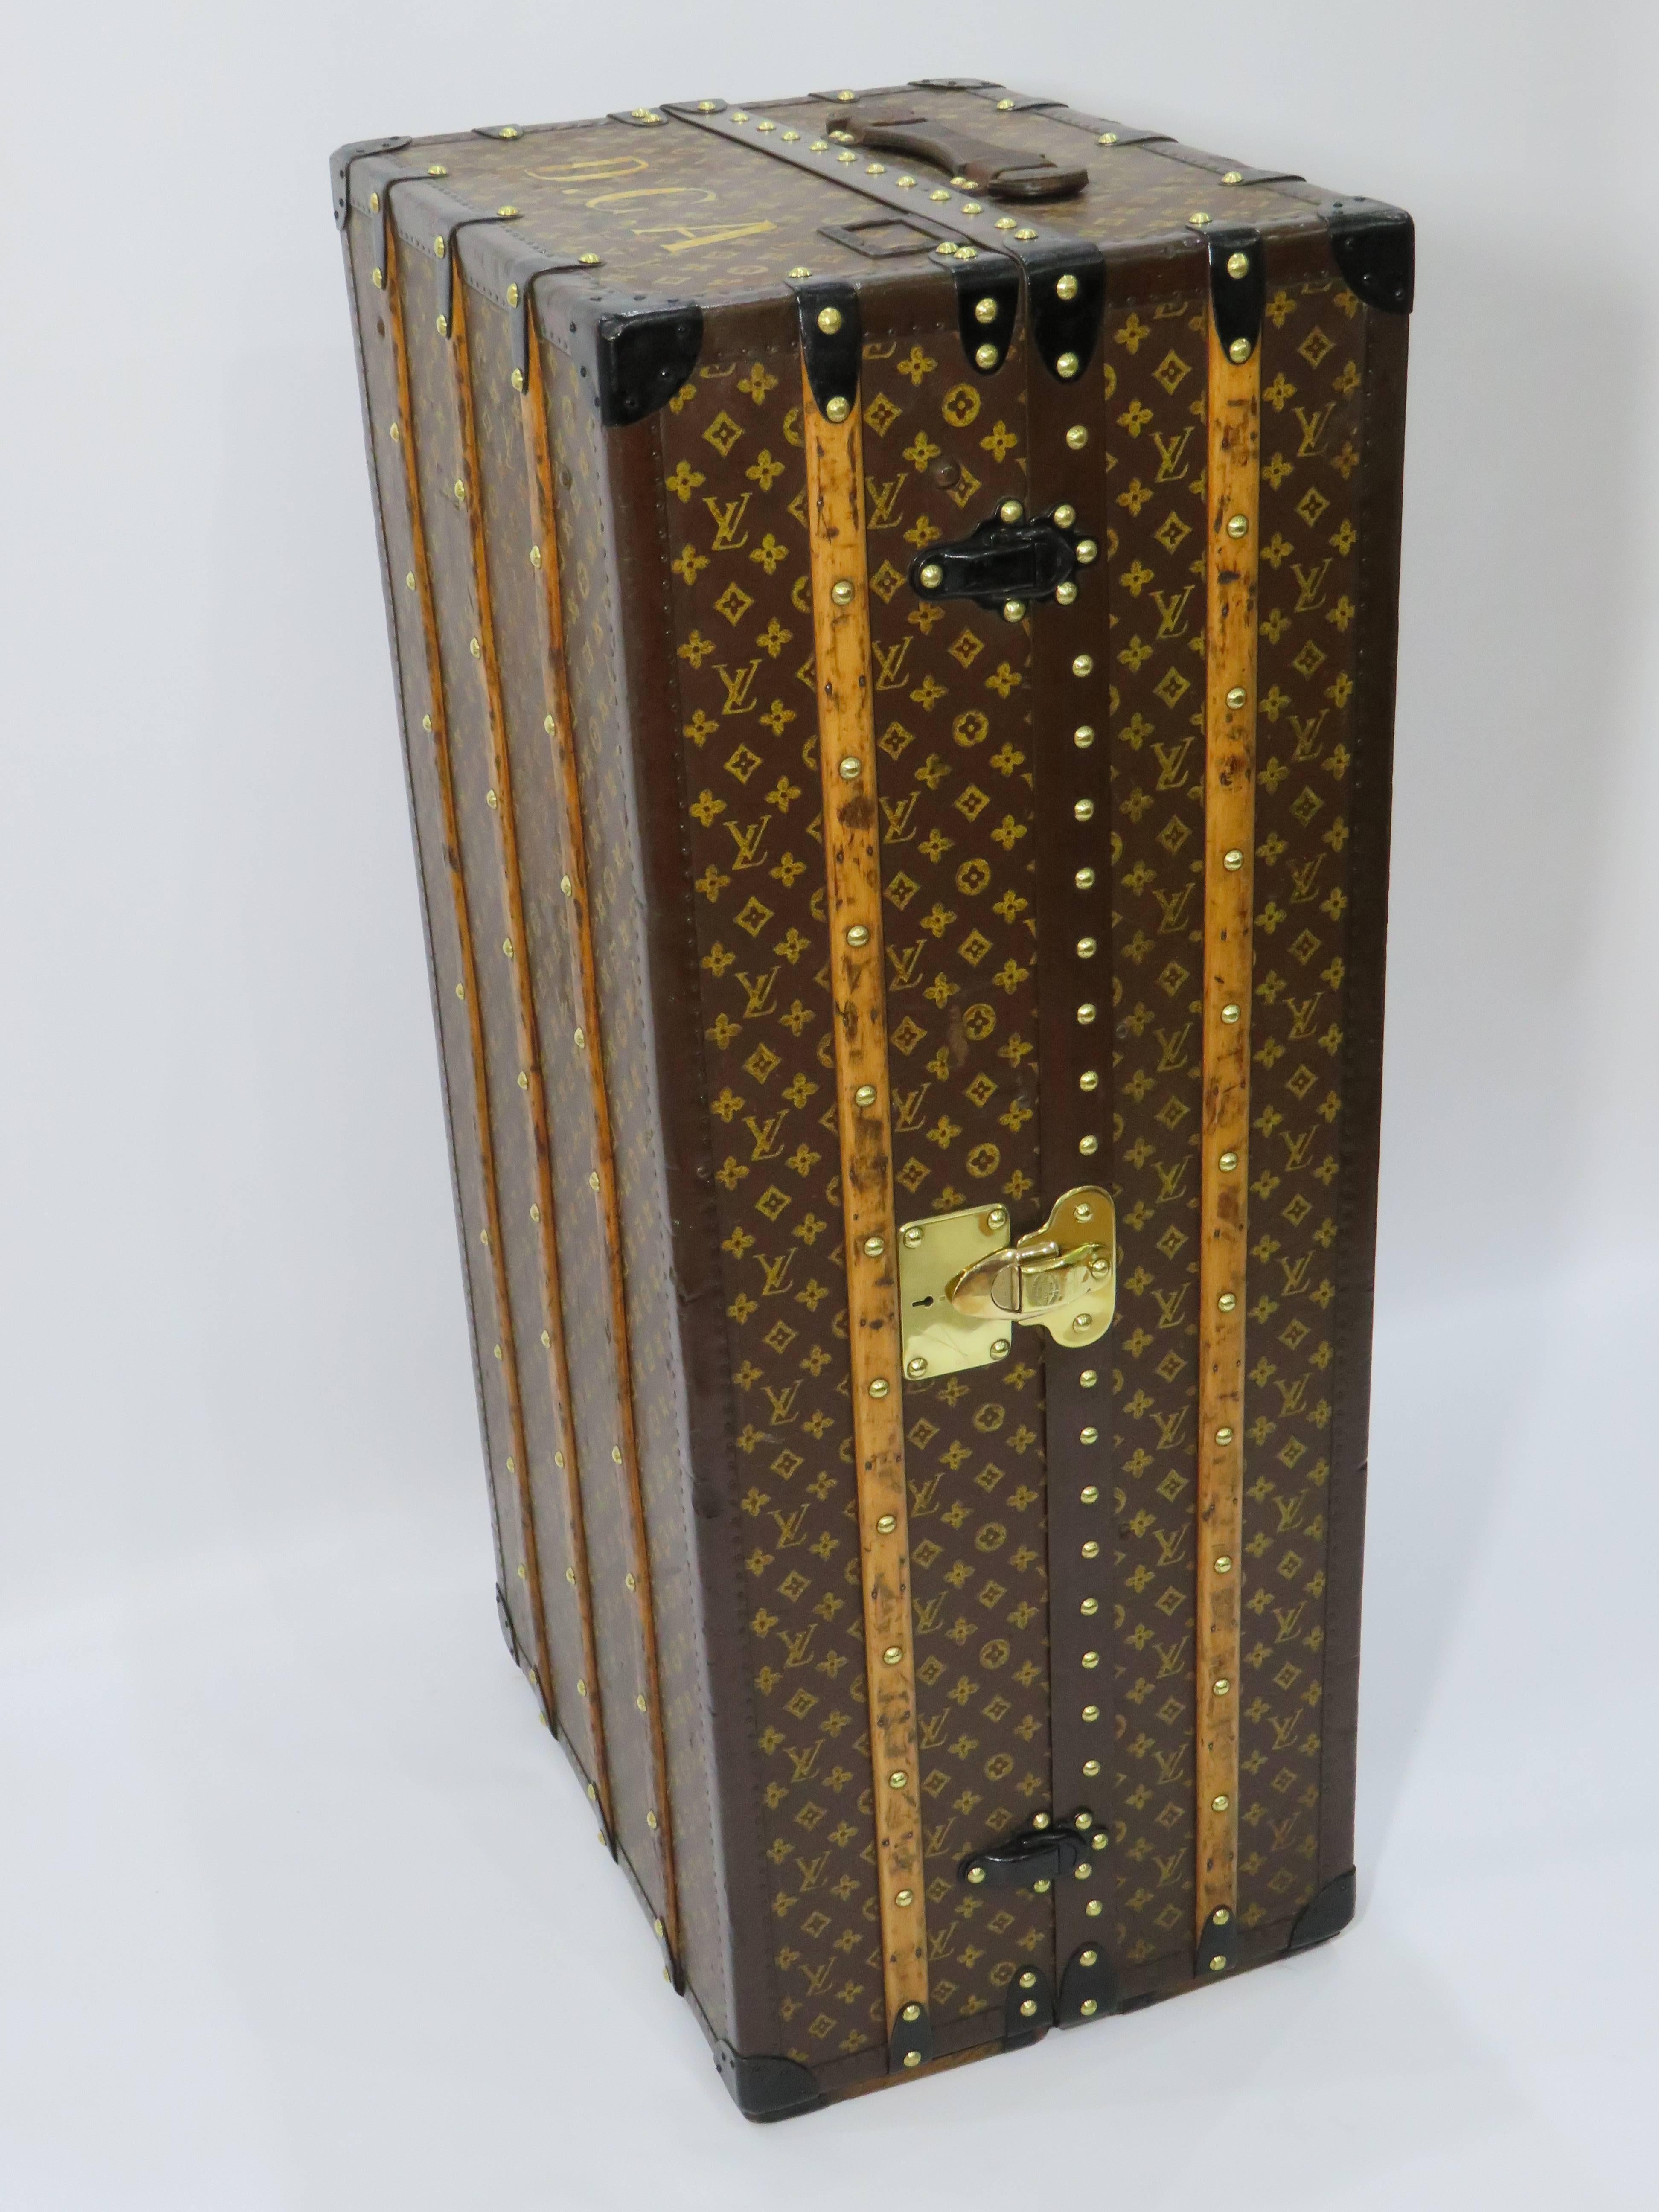 For sale a beautiful example of an early 20th century Louis Vuitton monogram wardrobe trunk with steel hardware, brass lock and brown monogram stamped lozine.

In remarkably good condition for age as clearly seen in the photos.